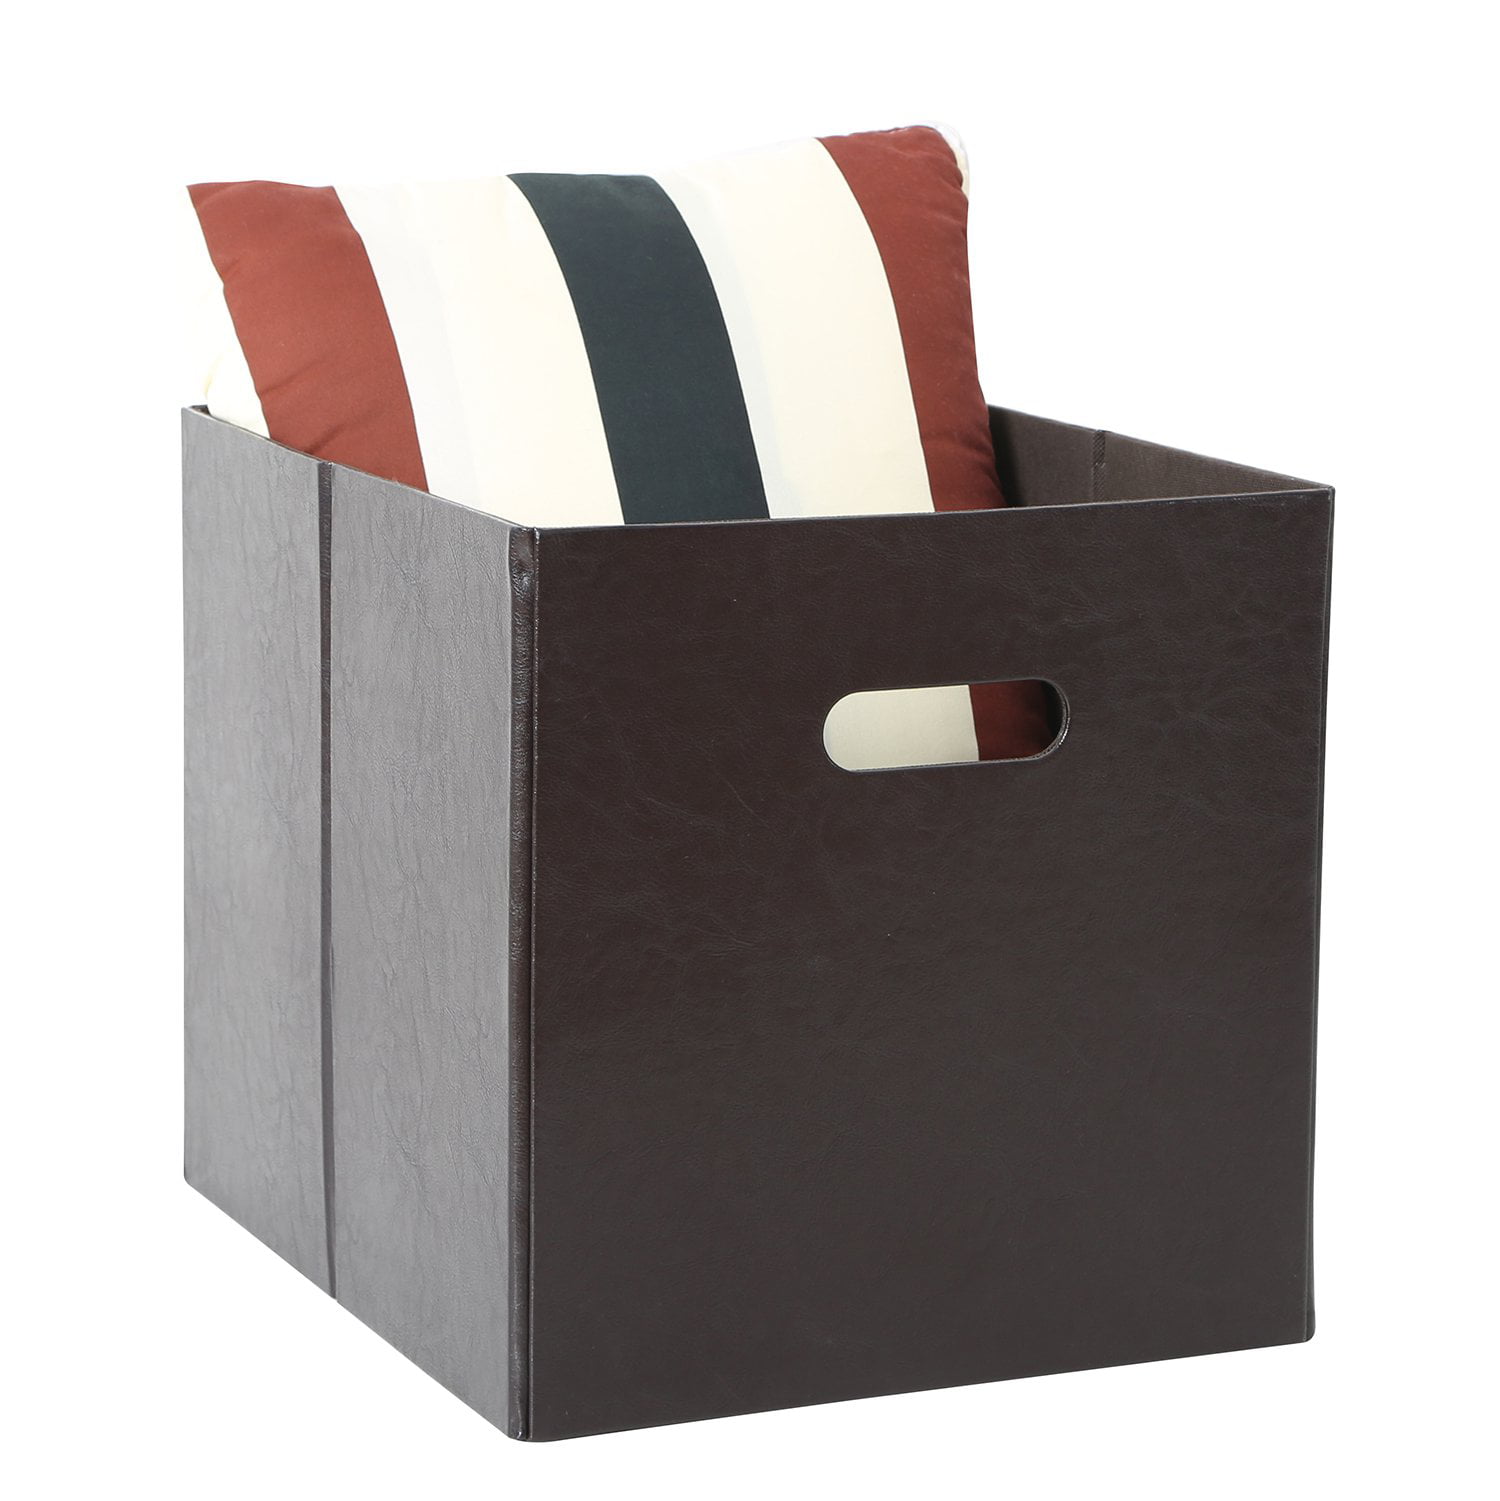 Tidy Living Faux Leather Cube Storage, Leather Storage Cubes